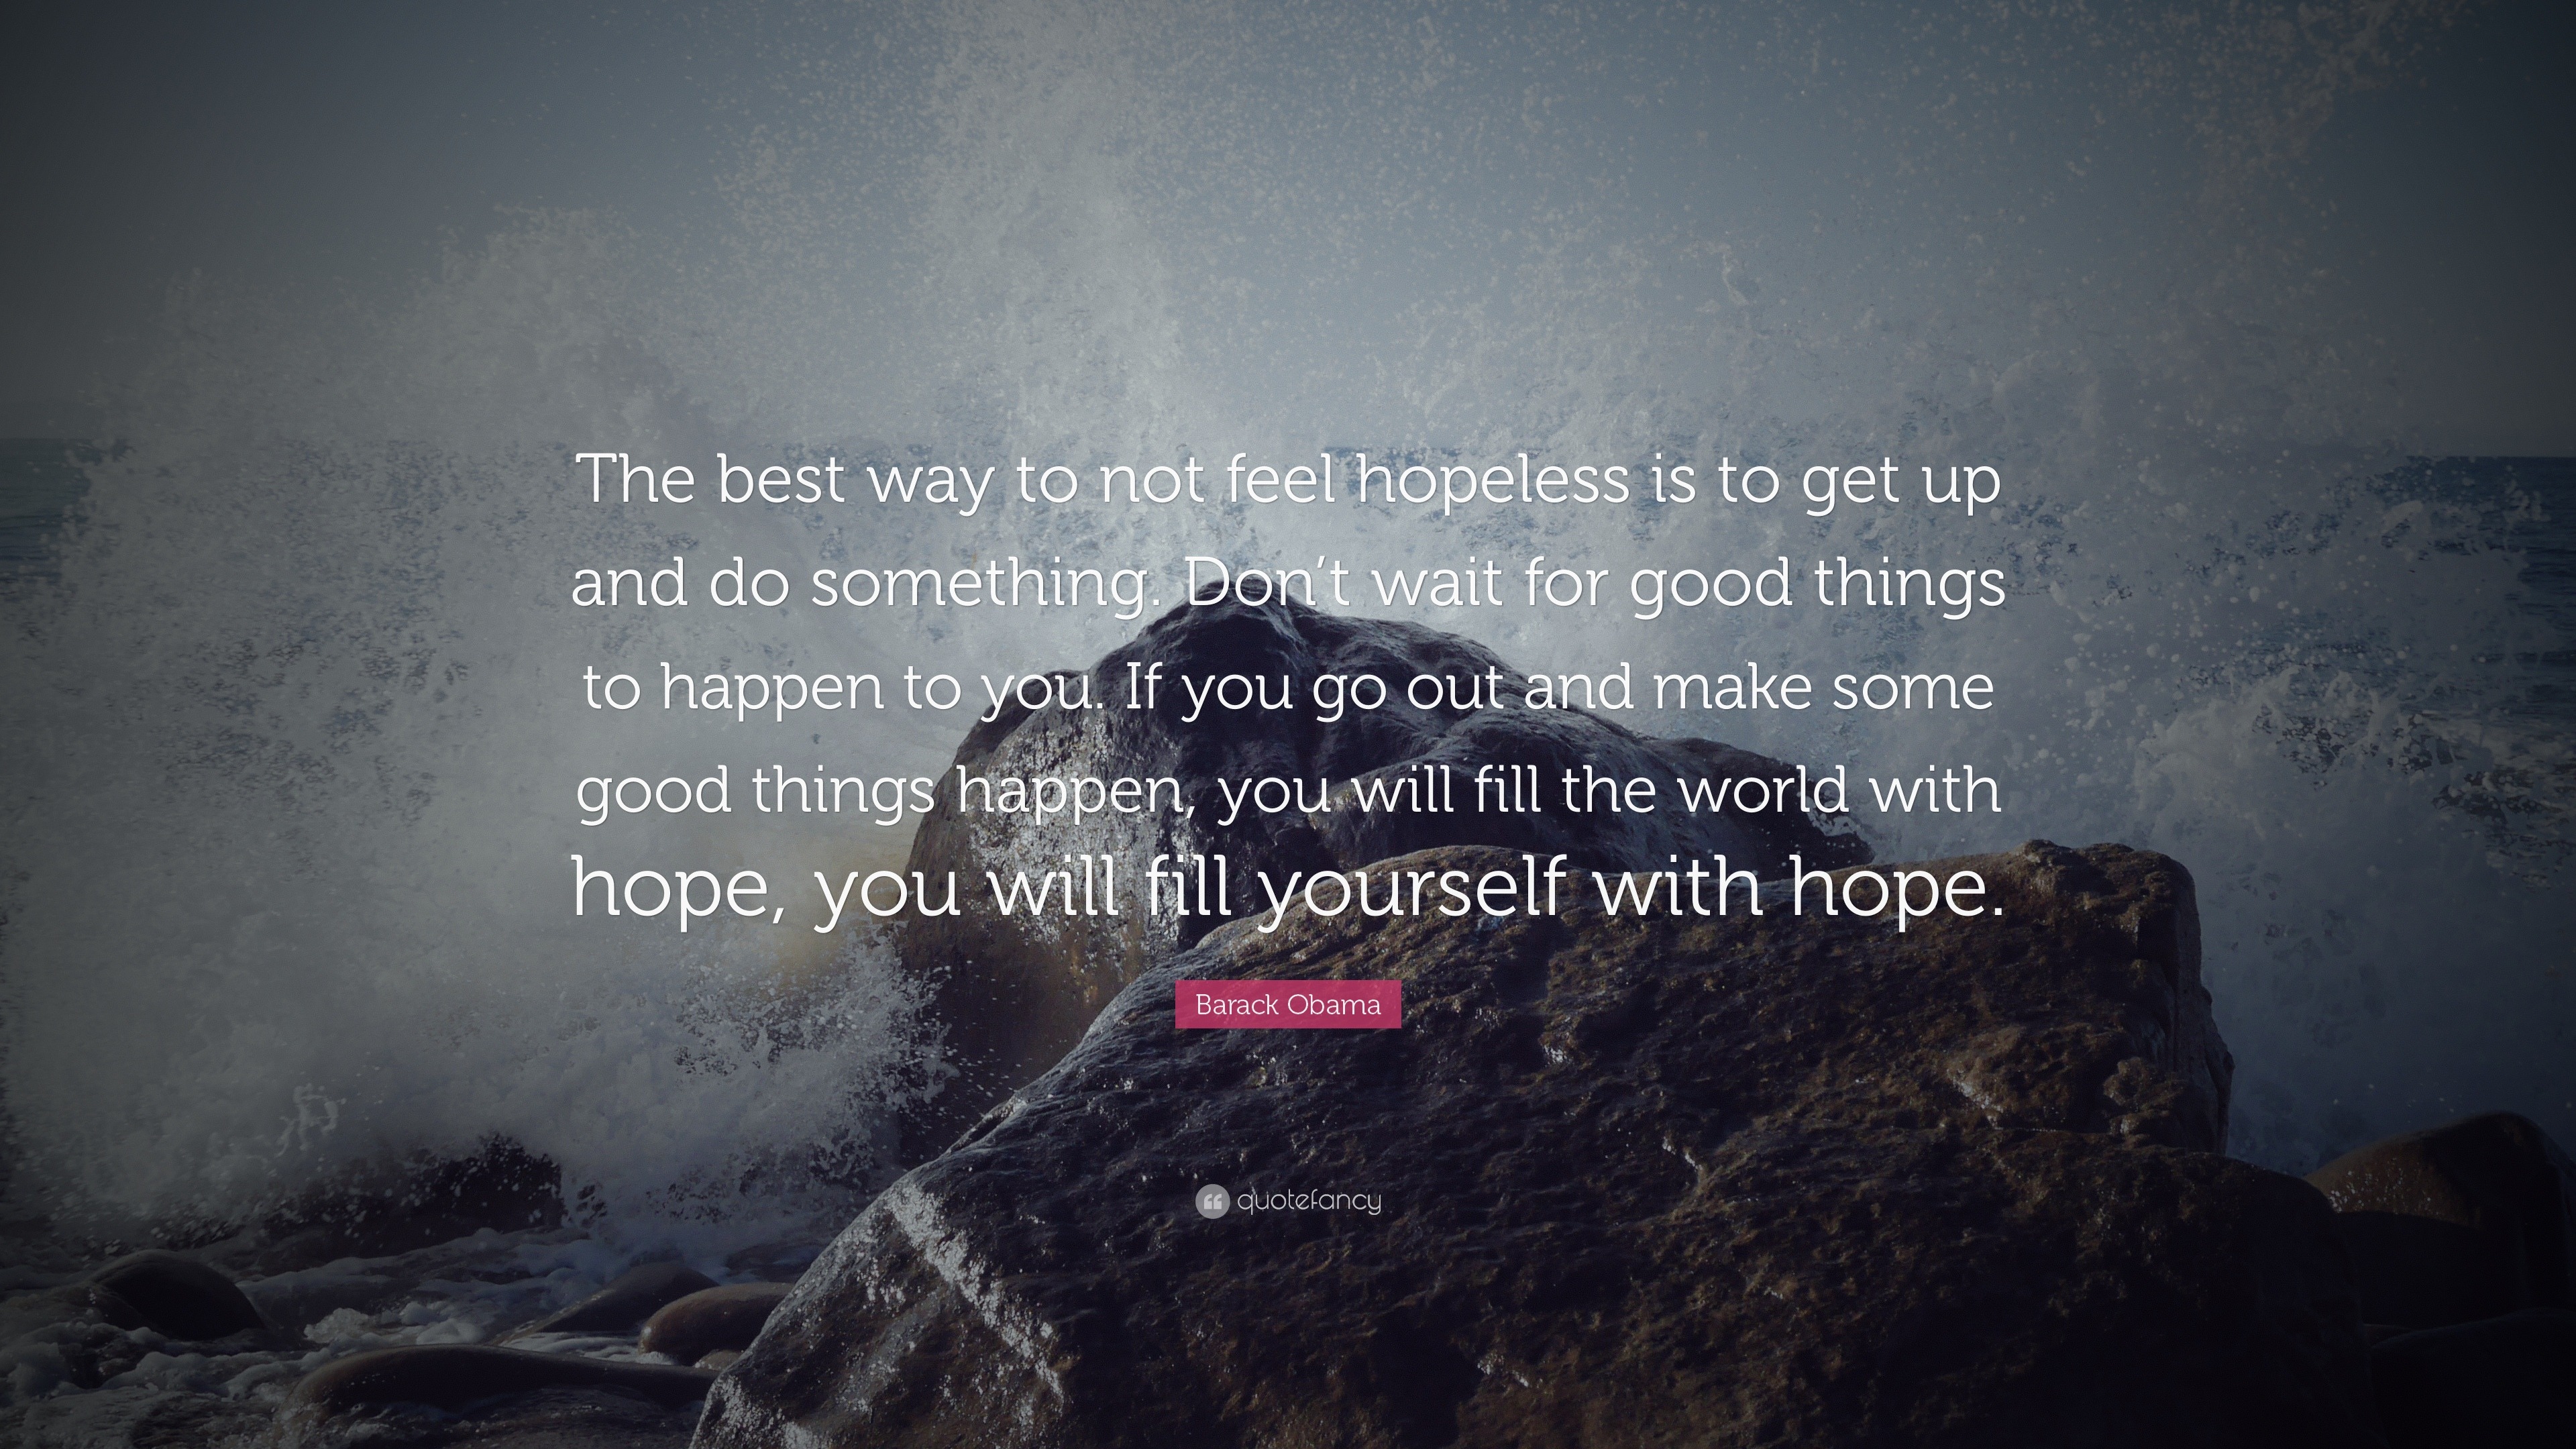 Barack Obama Quote: “The best way to not feel hopeless is to get up and ...